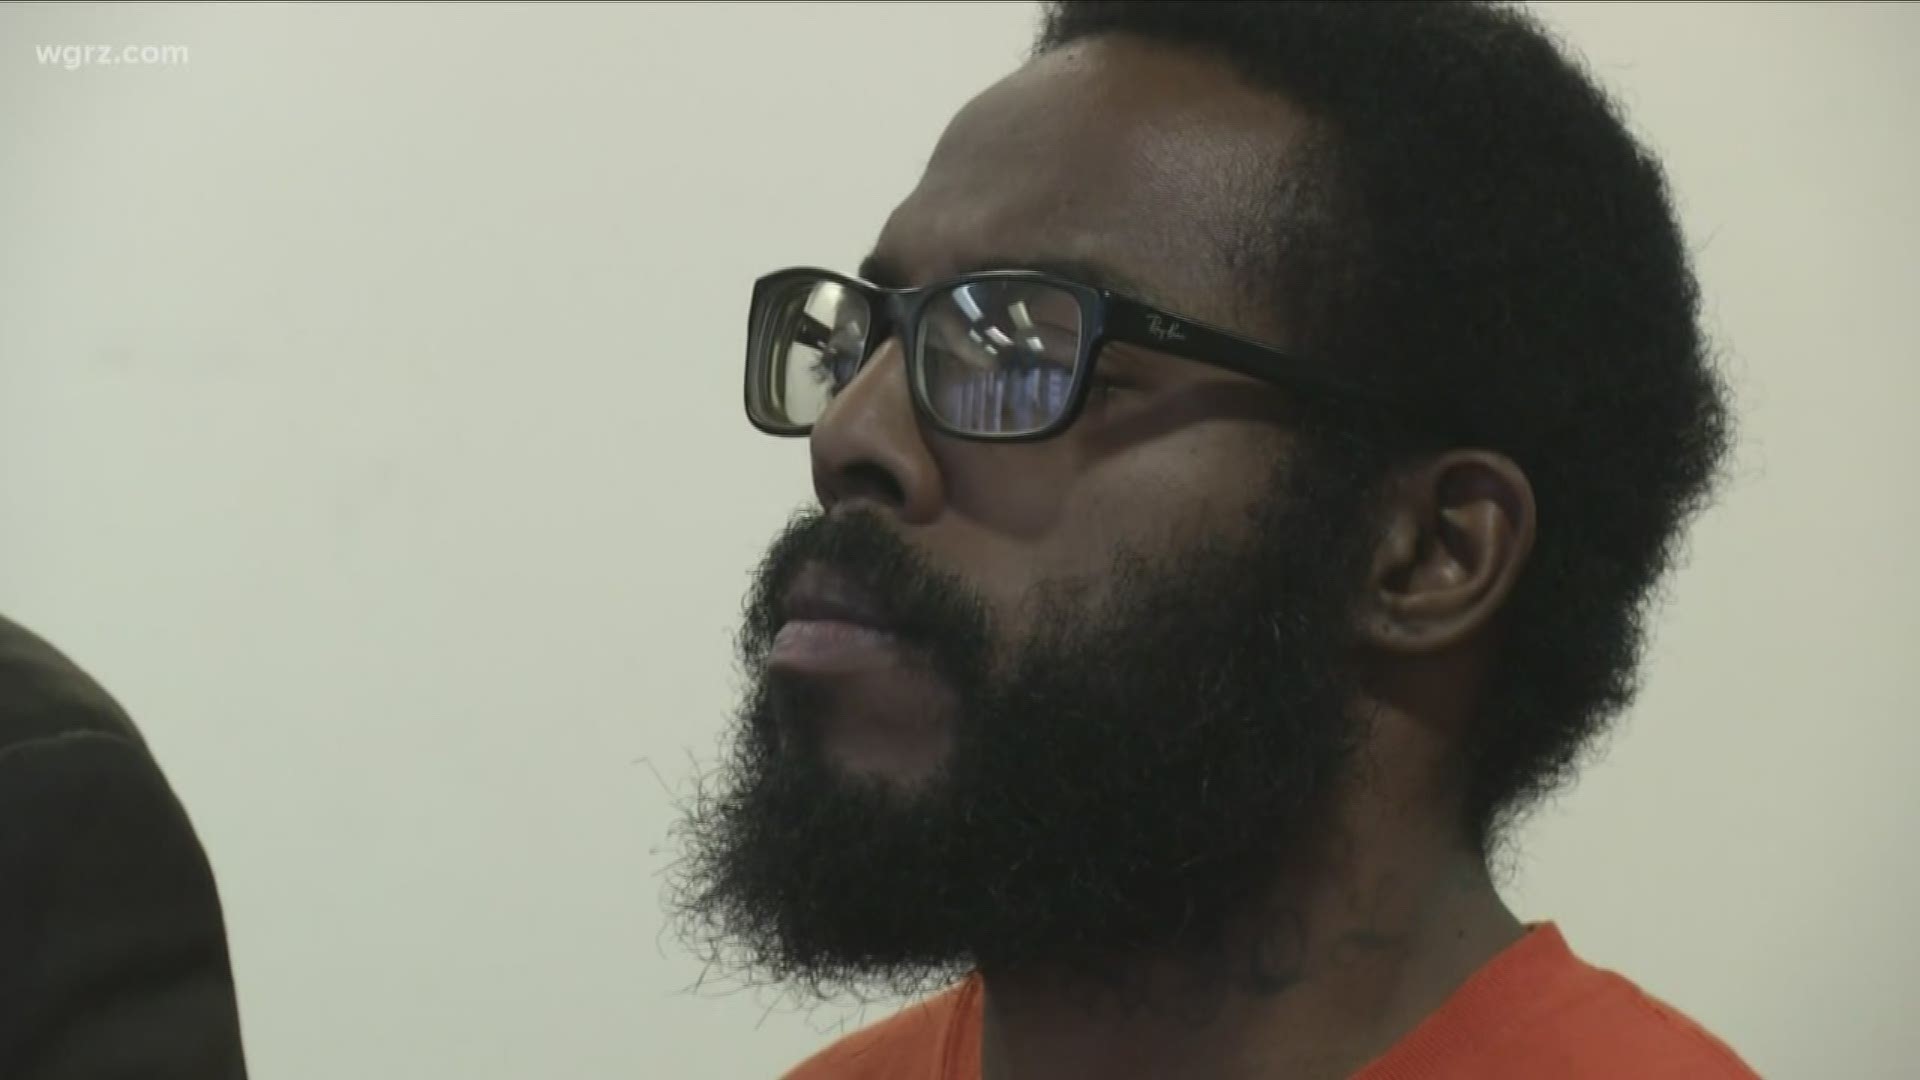 THE MAN ACCUSED OF THE SHOOTING AT THE DOLLAR GENERAL STORE ... HAS NOW BEEN RULED "NOT" COMPETANT TO STAND TRIAL.